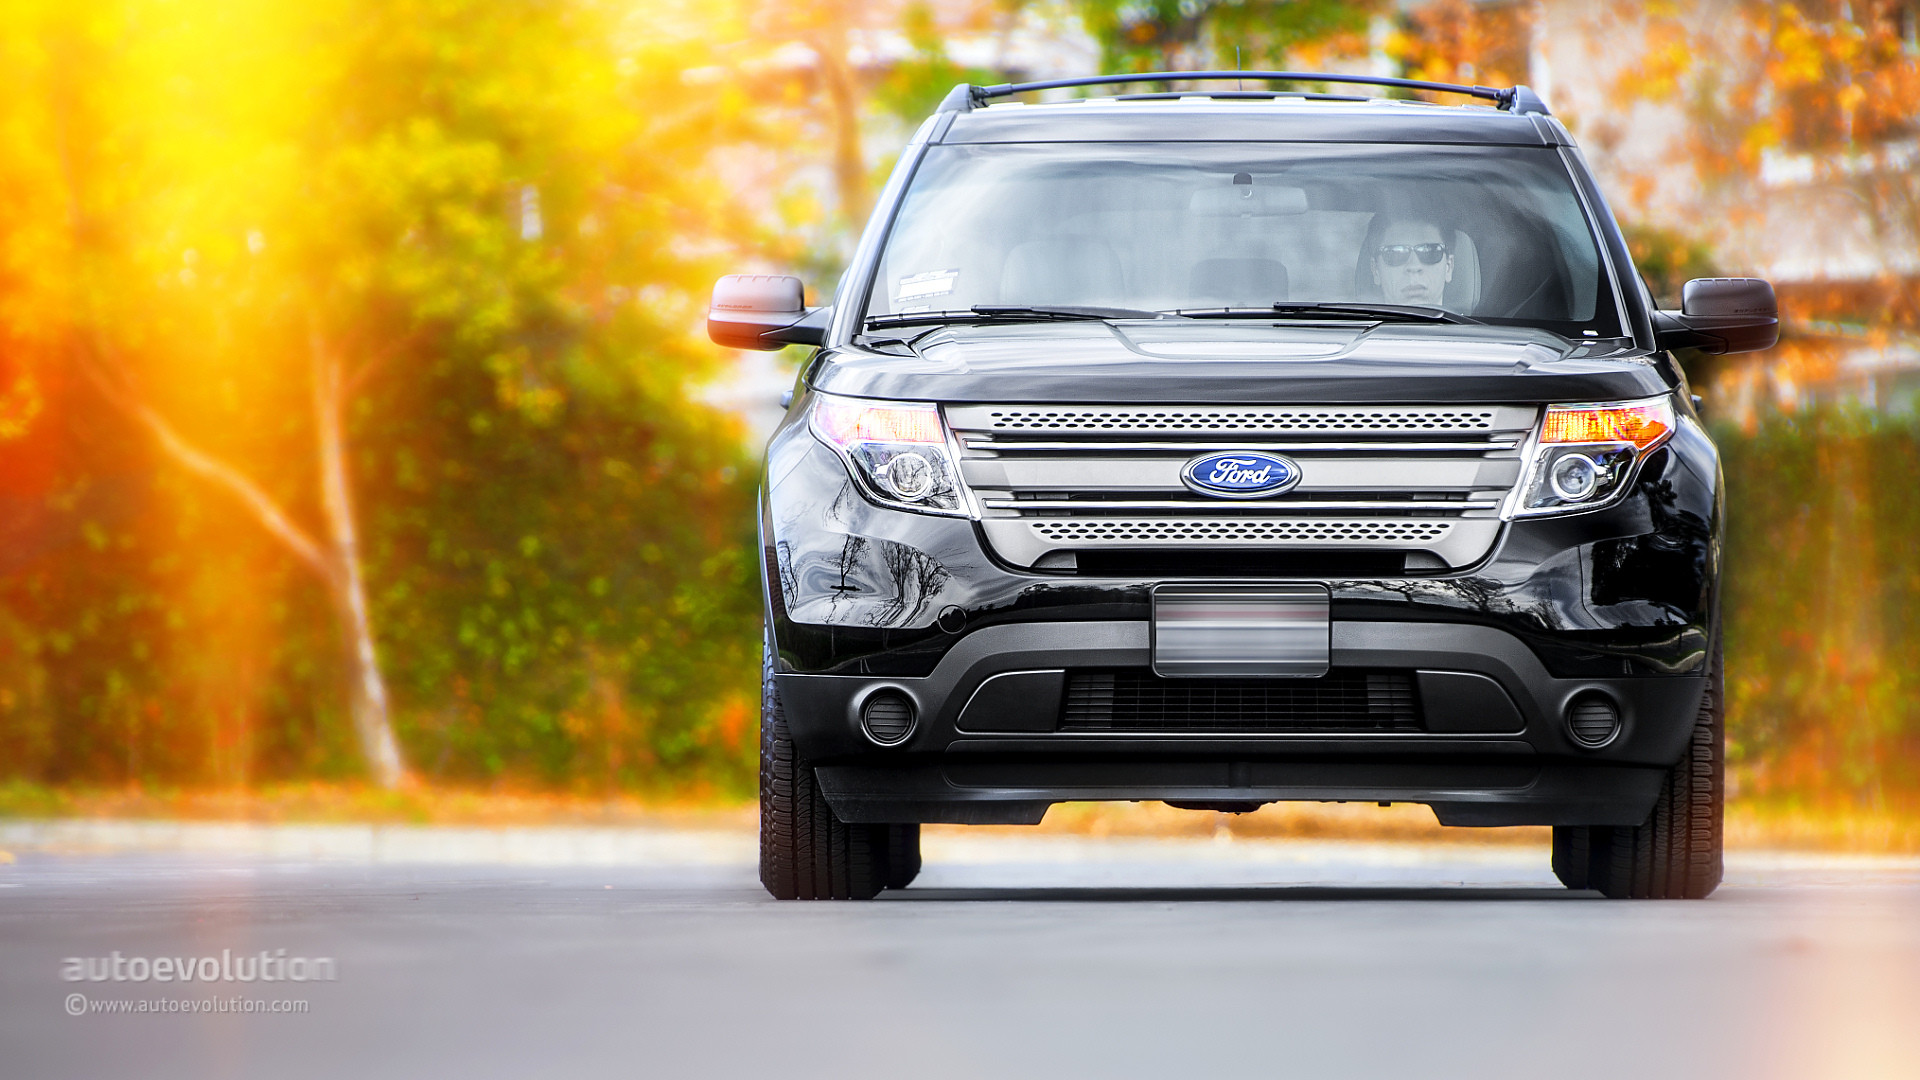 1920x1080 2014 Ford Explorer HD Wallpapers